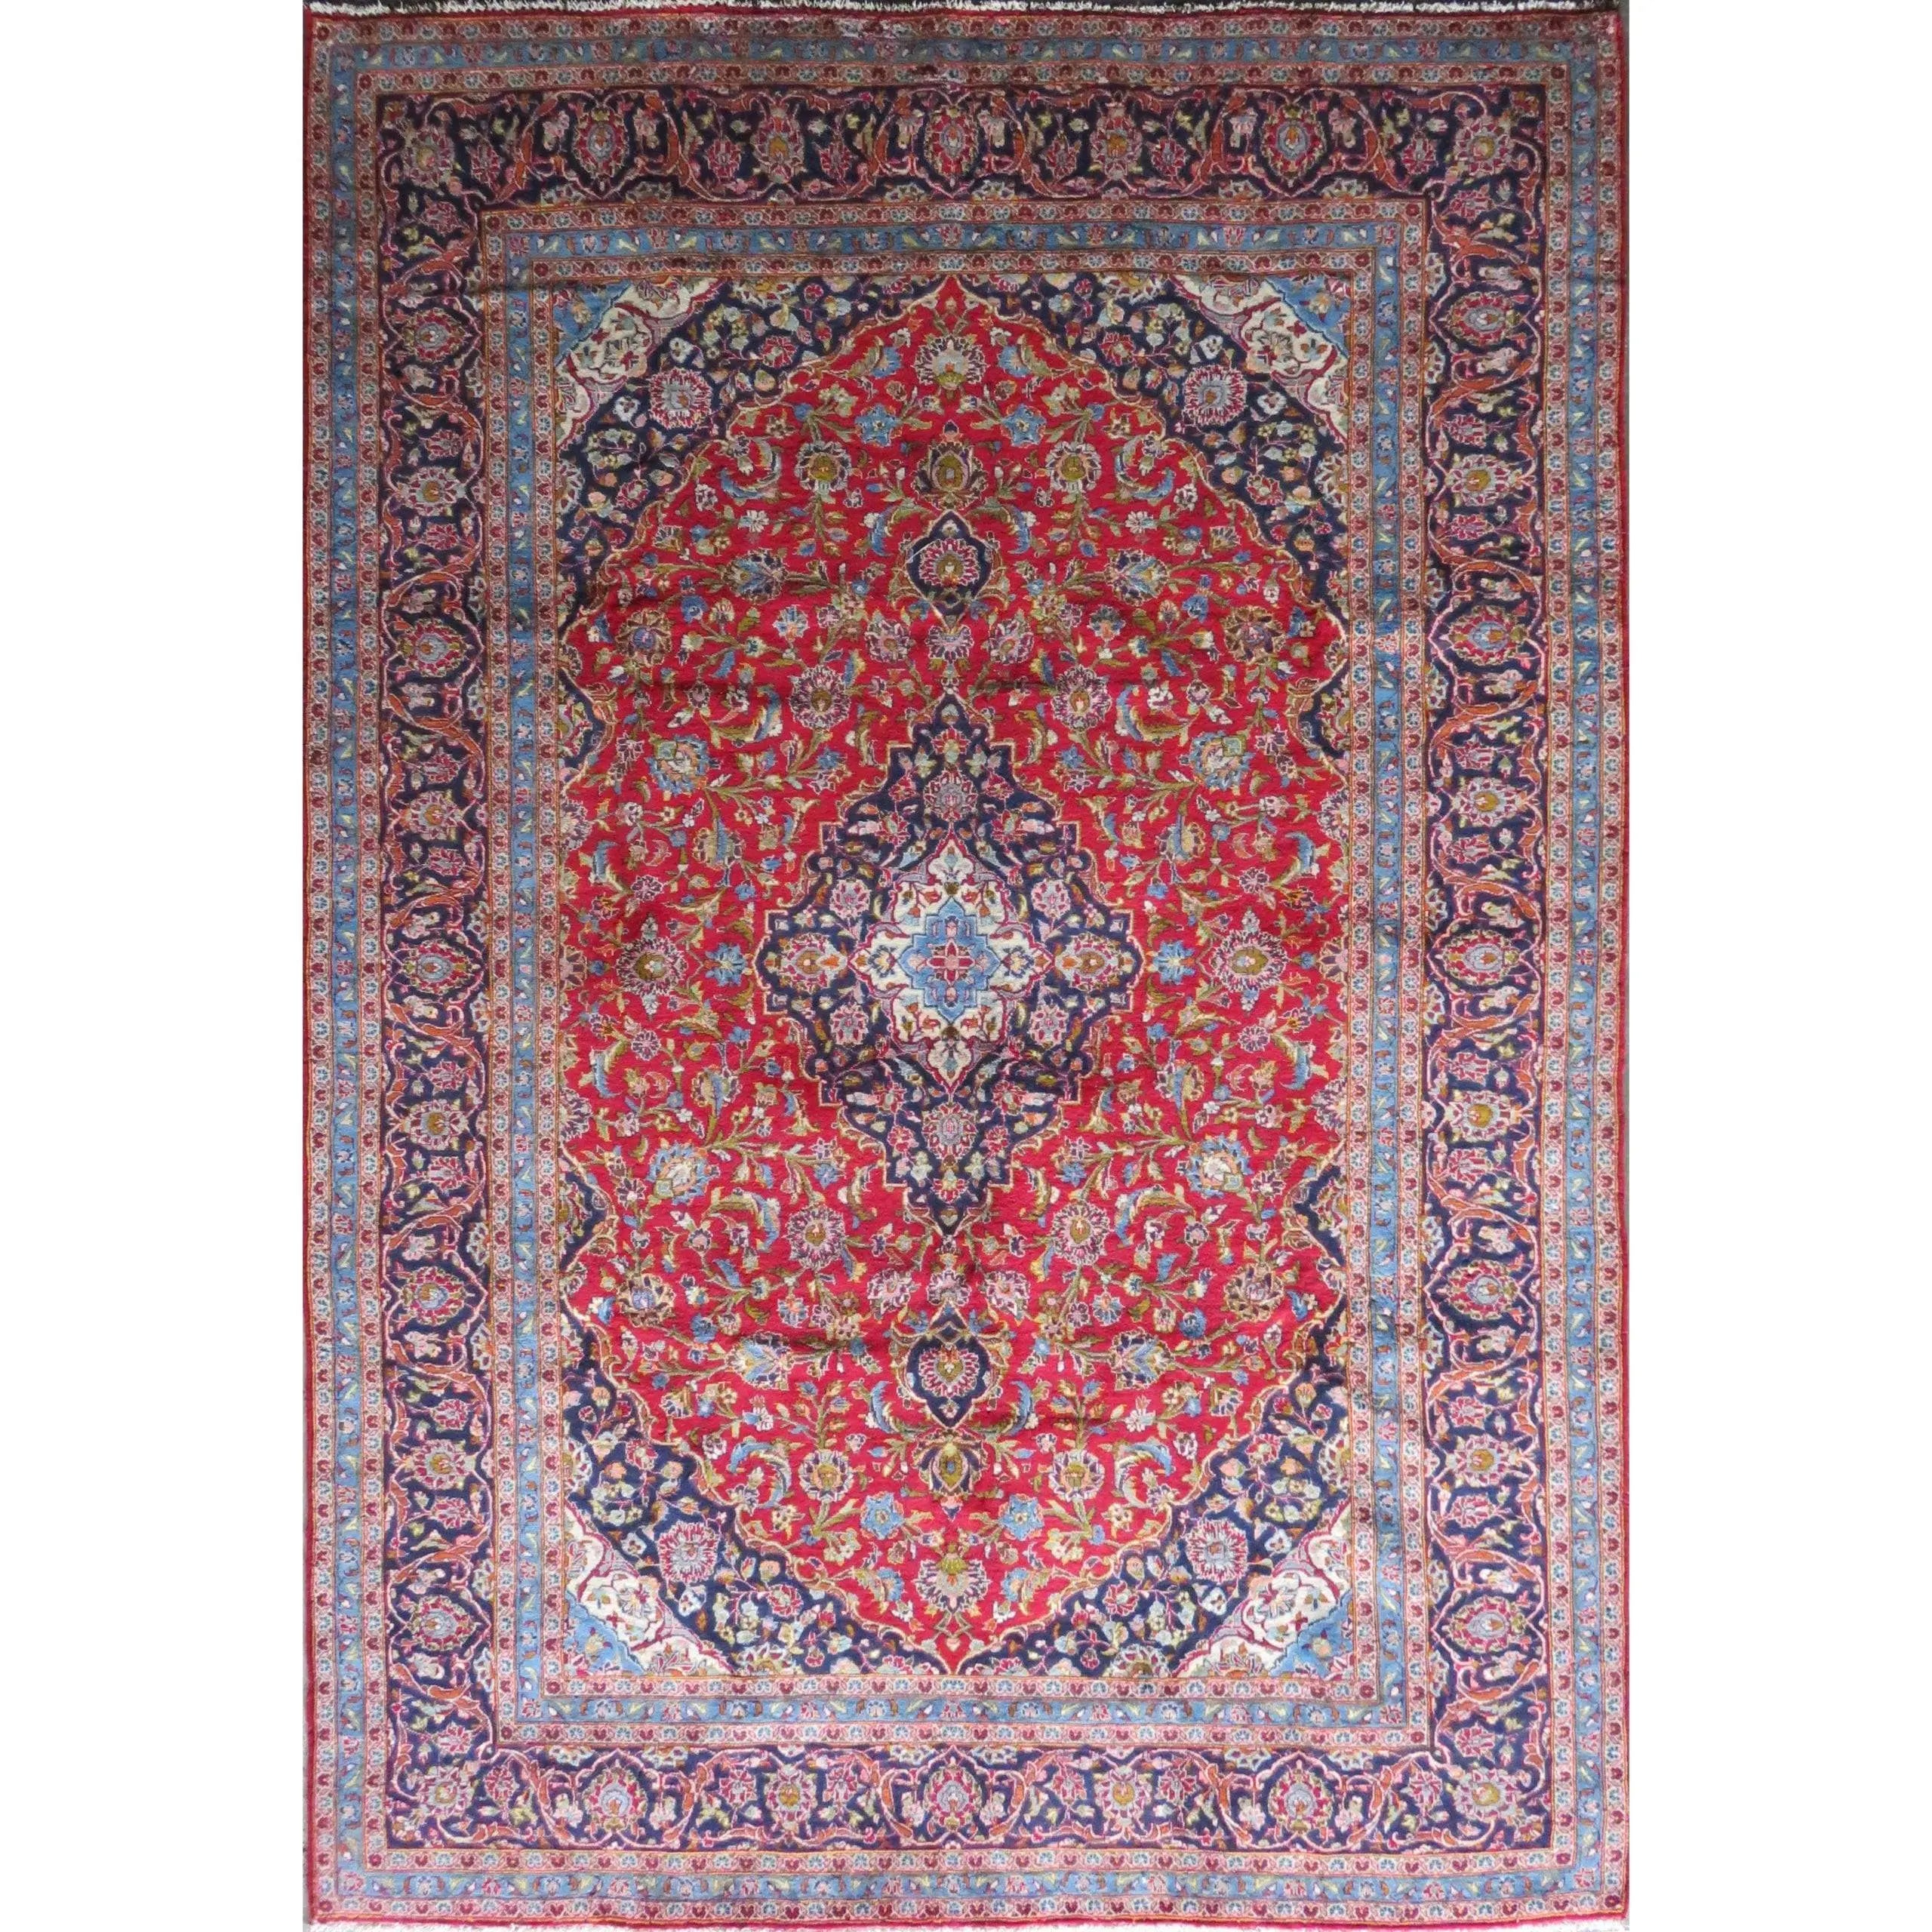 Hand-Knotted Persian Wool Rug _ Luxurious Vintage Design, 11'10" X 8'3", Artisan Crafted